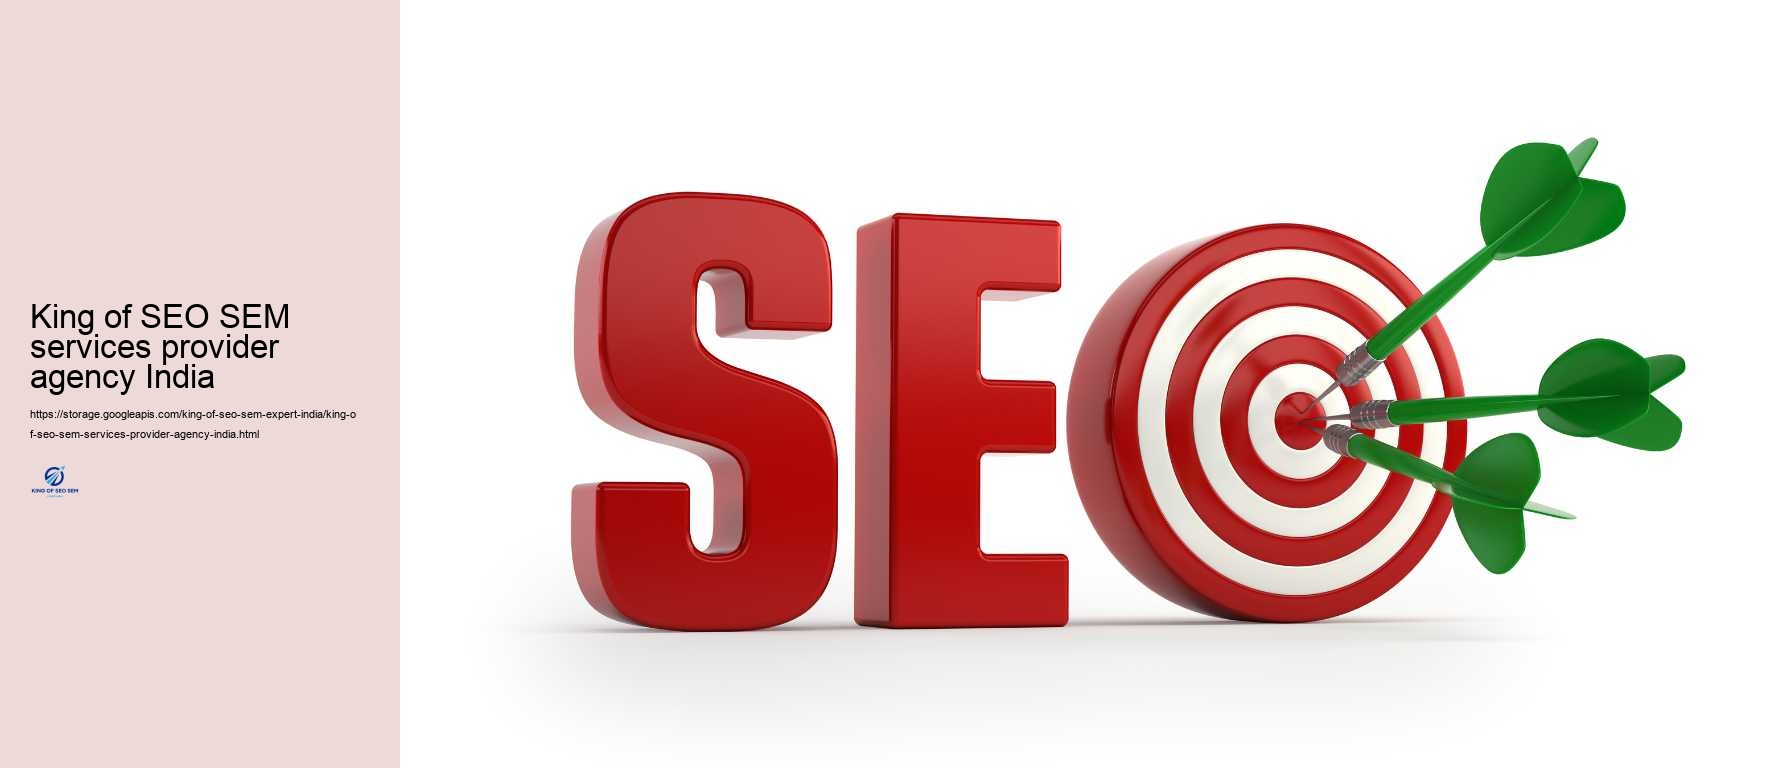 King of SEO SEM services provider agency India